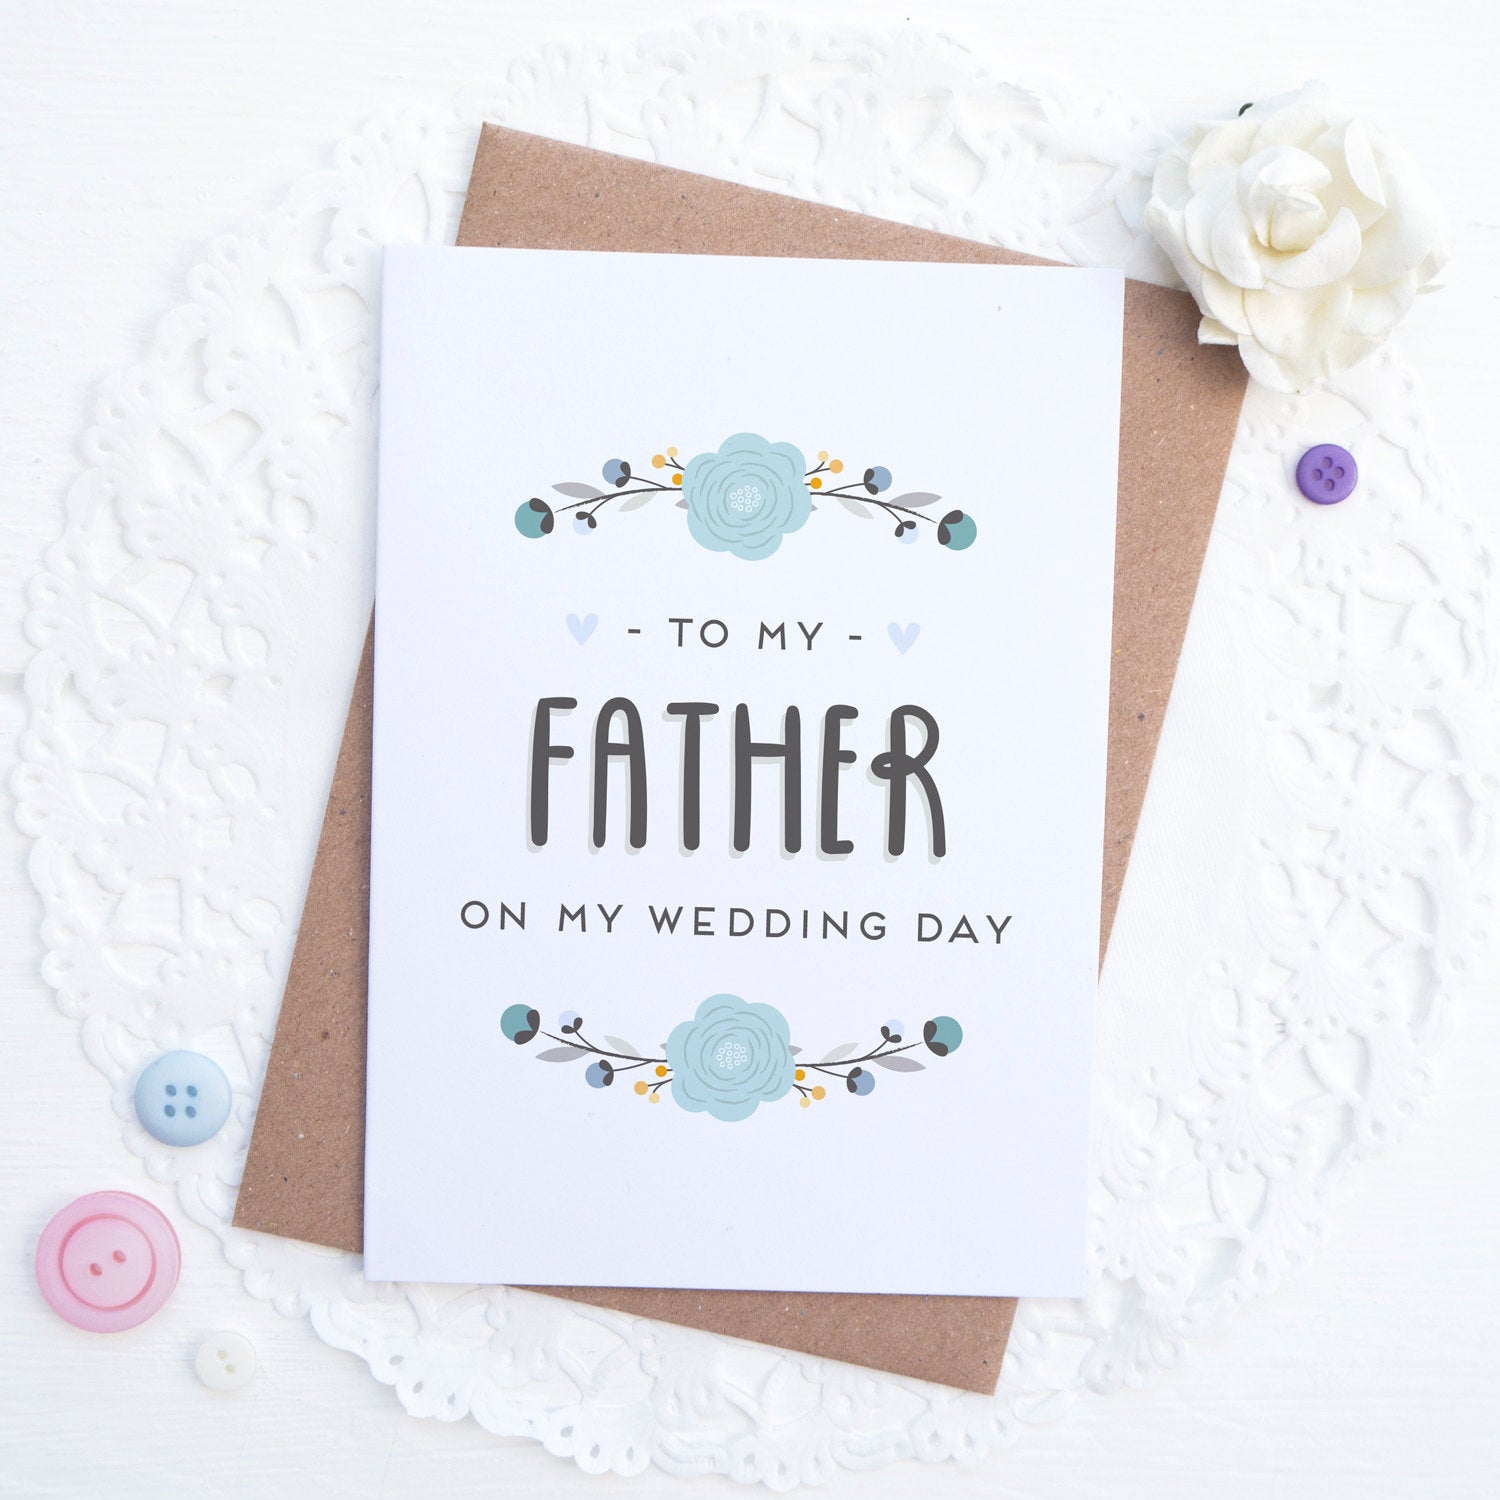 To my father on my wedding day card in blue